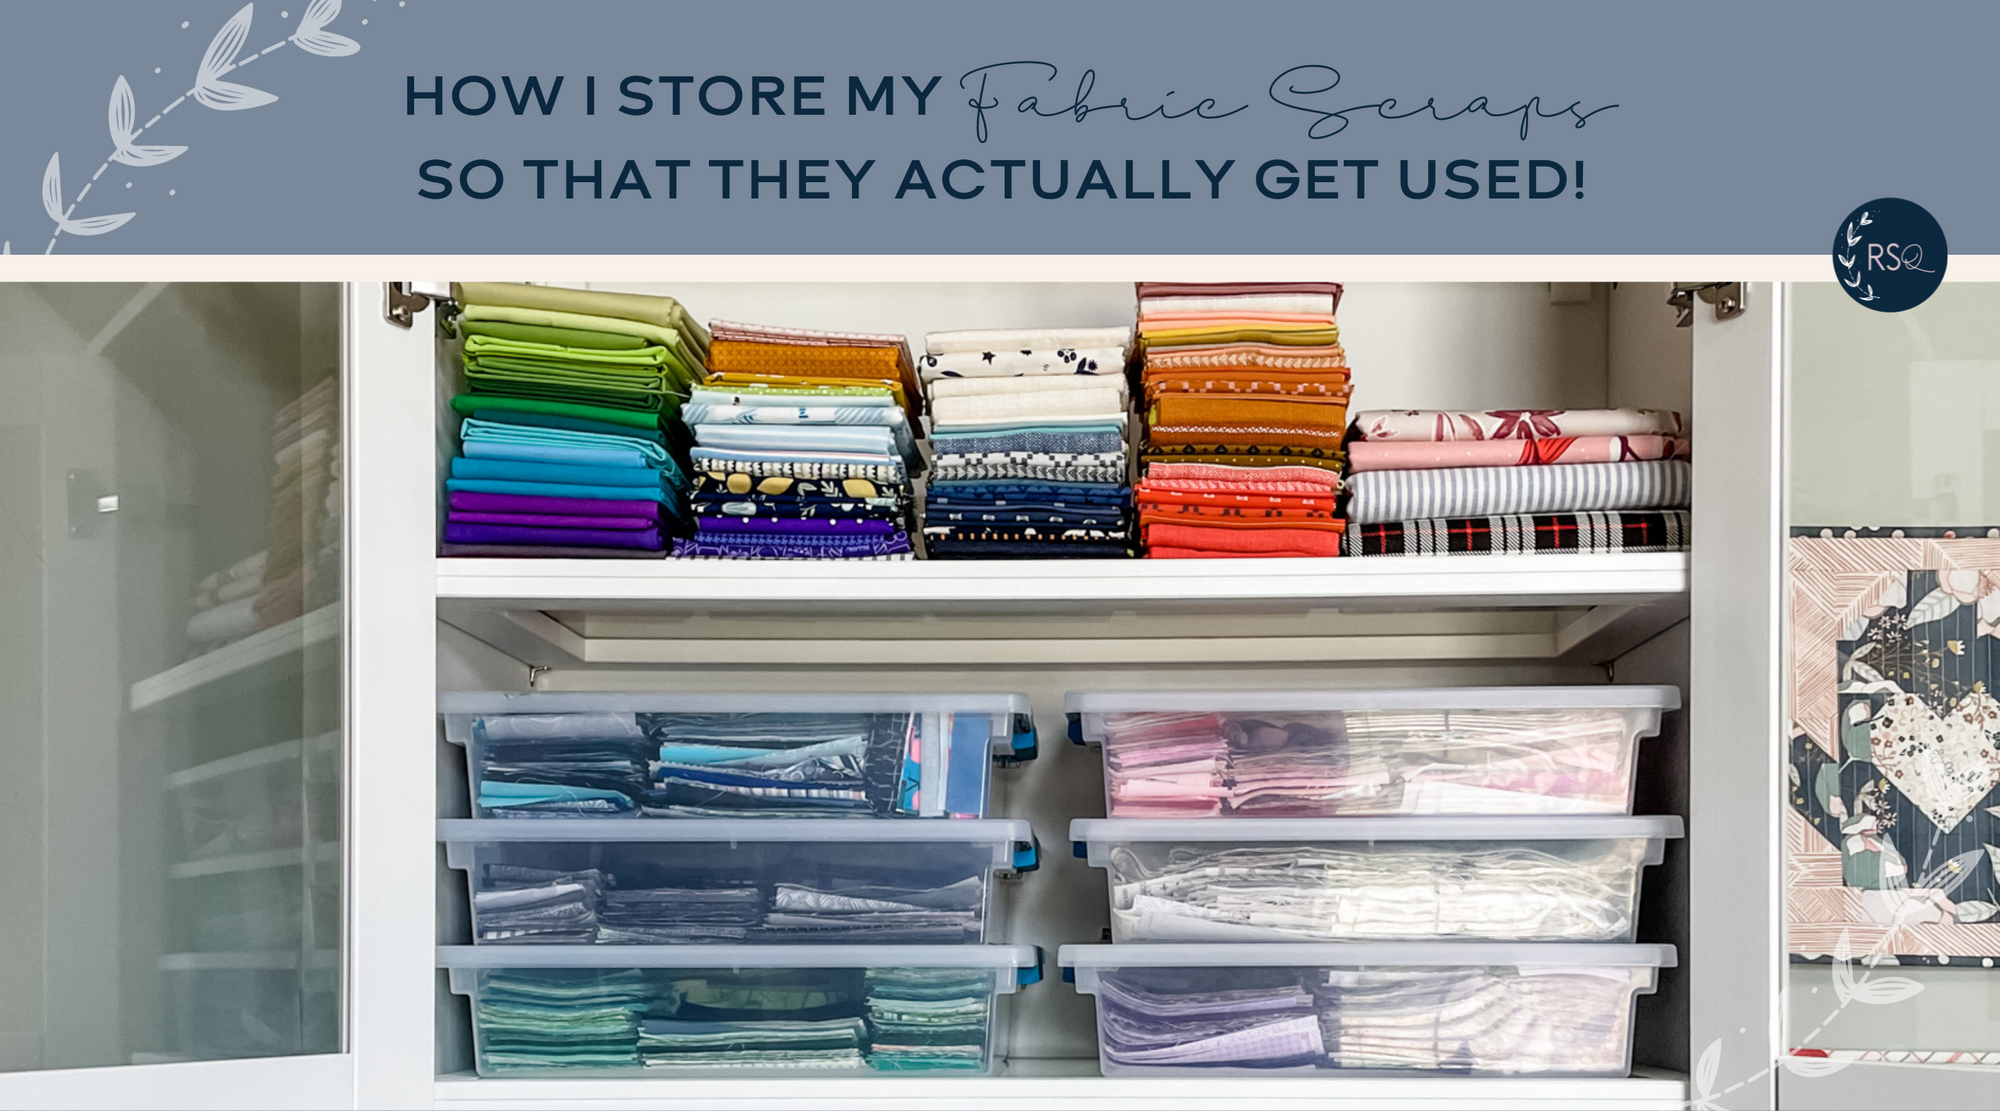 How I Store and Manage My Fabric Scraps